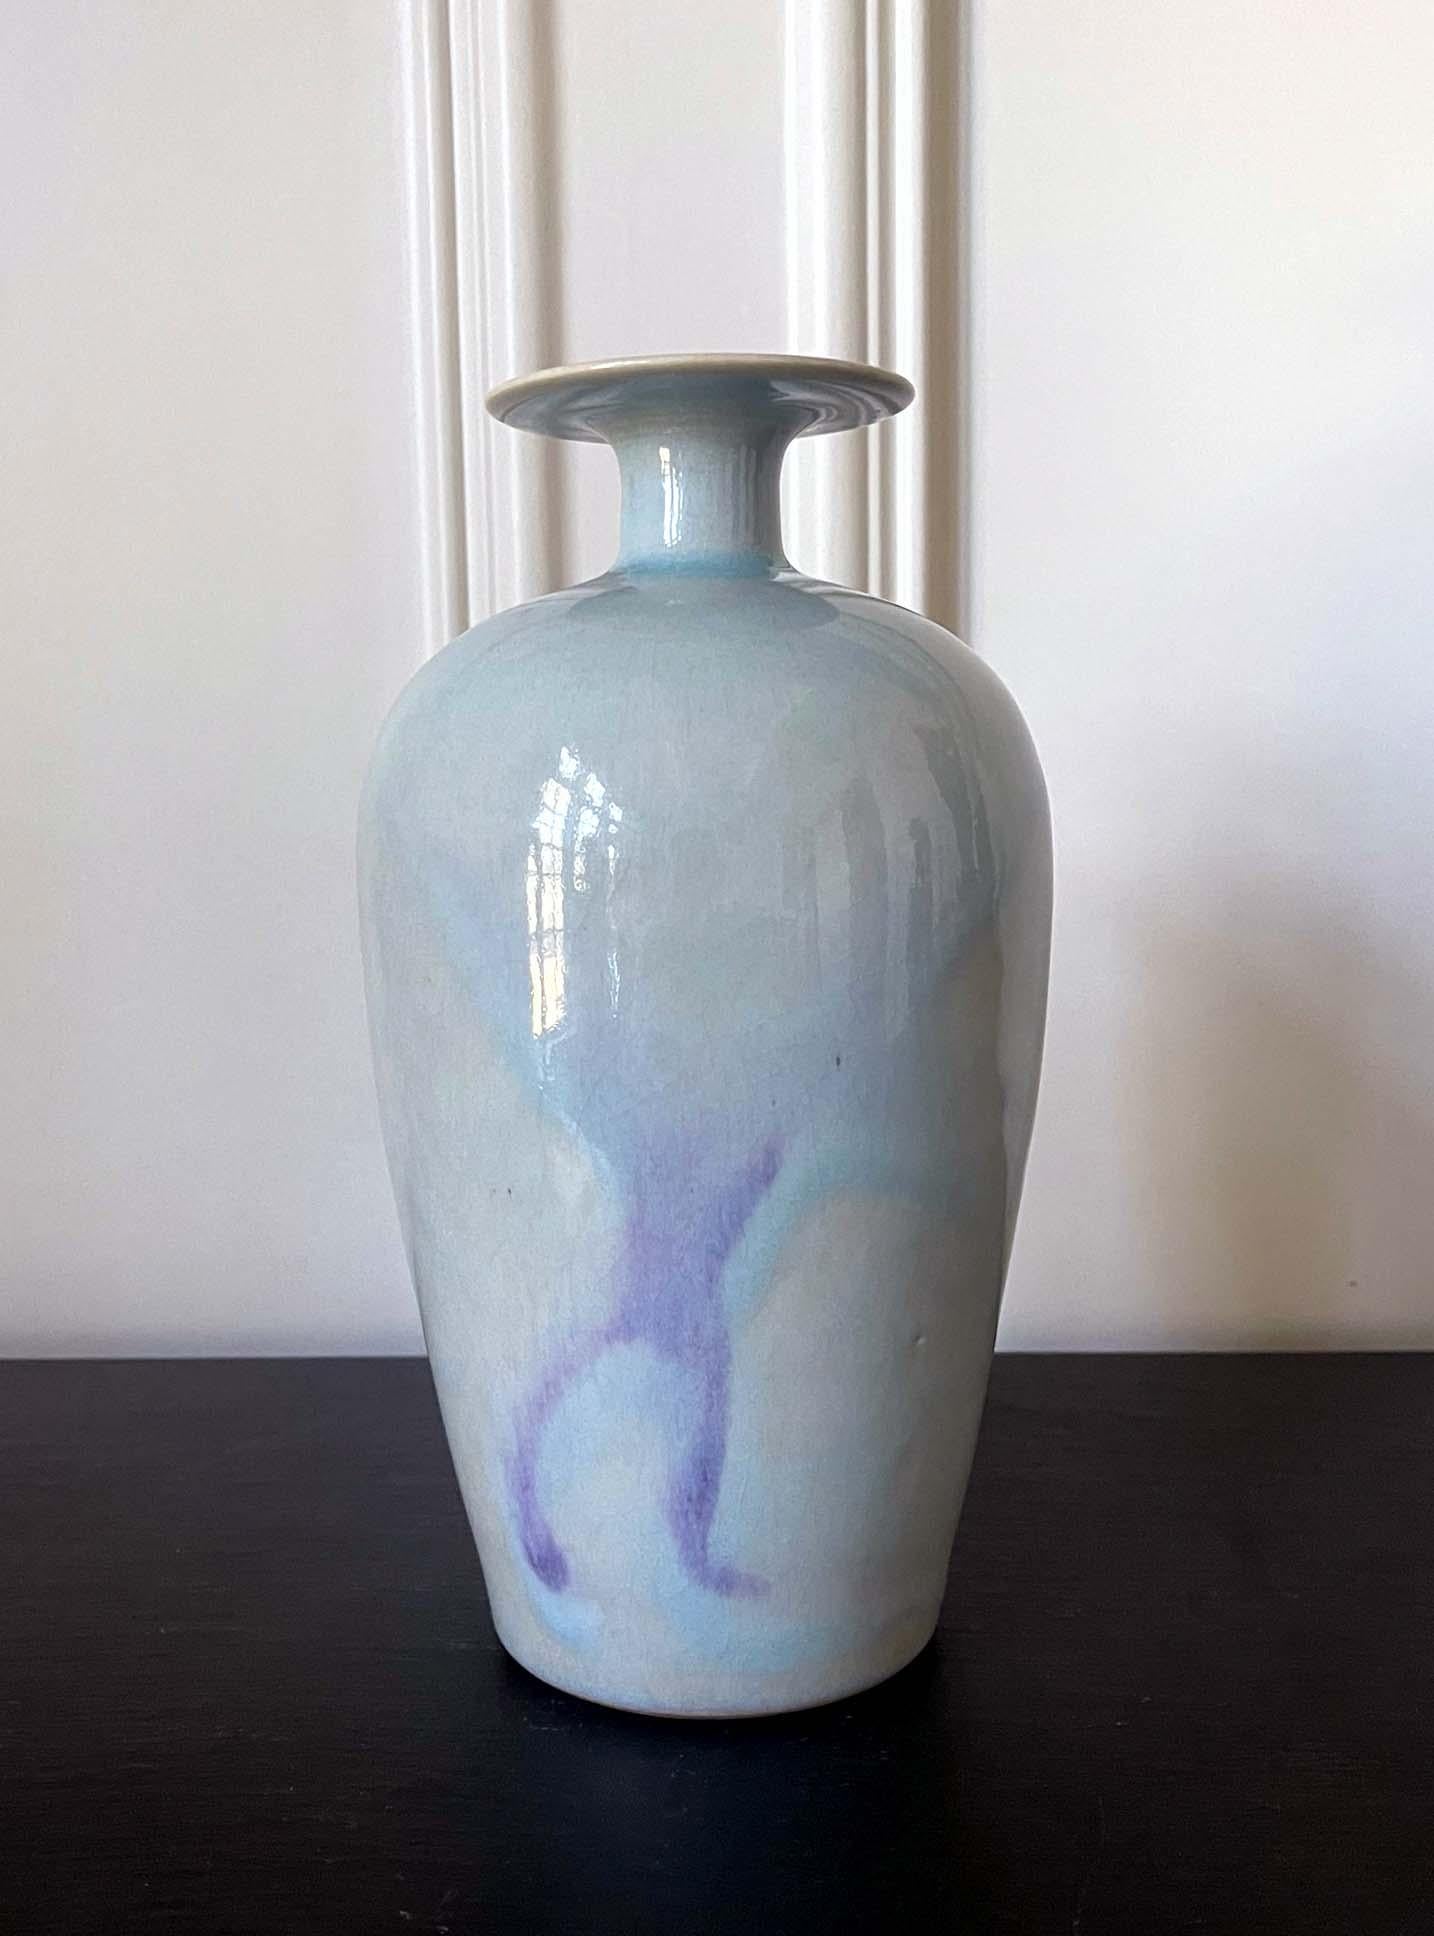 A ceramic vase crafted by Brother Thomas Bezanson (1929-2007) circa 1970s. The vase takes a classic Chinese 